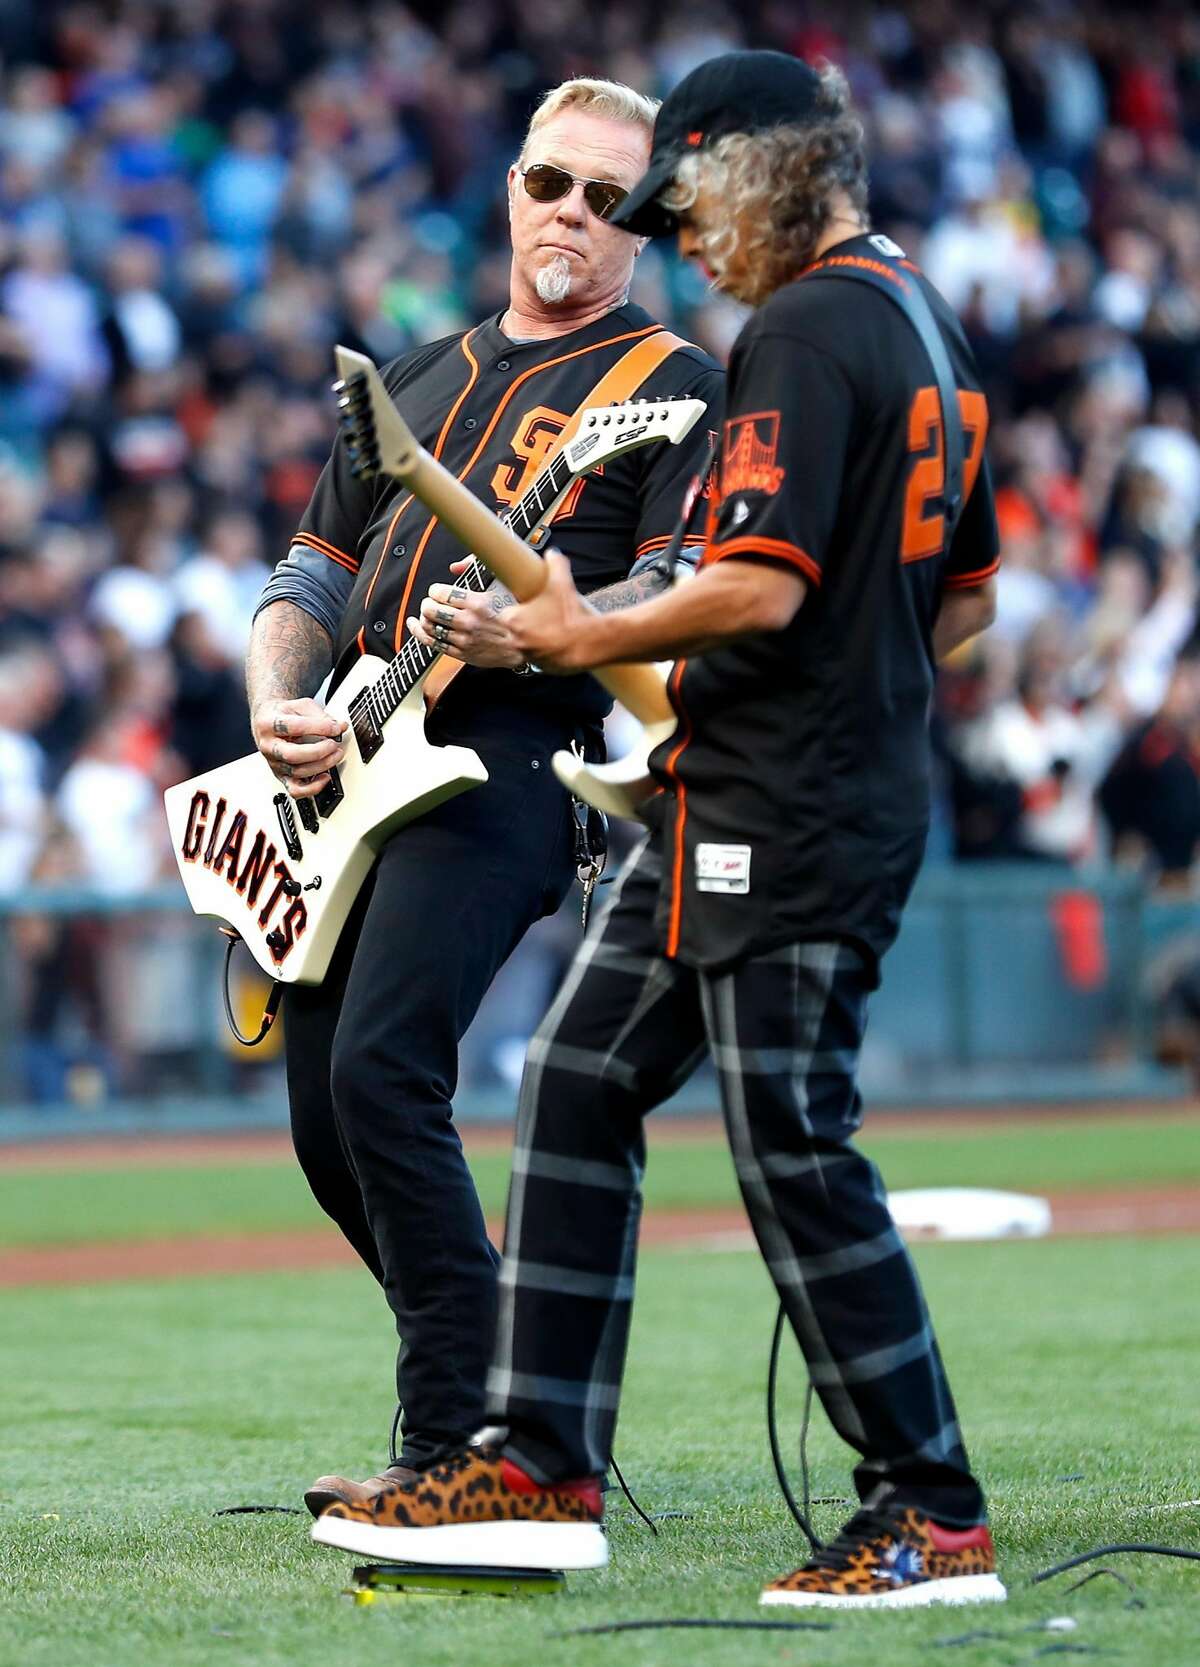 Metallica's James Hatfield and Kirk Hammett perform National Anthem before San Francisco Giants play Chicago Cubs during MLB game at AT&T Park in San Francisco, Calif. on Monday, August 7, 2017.